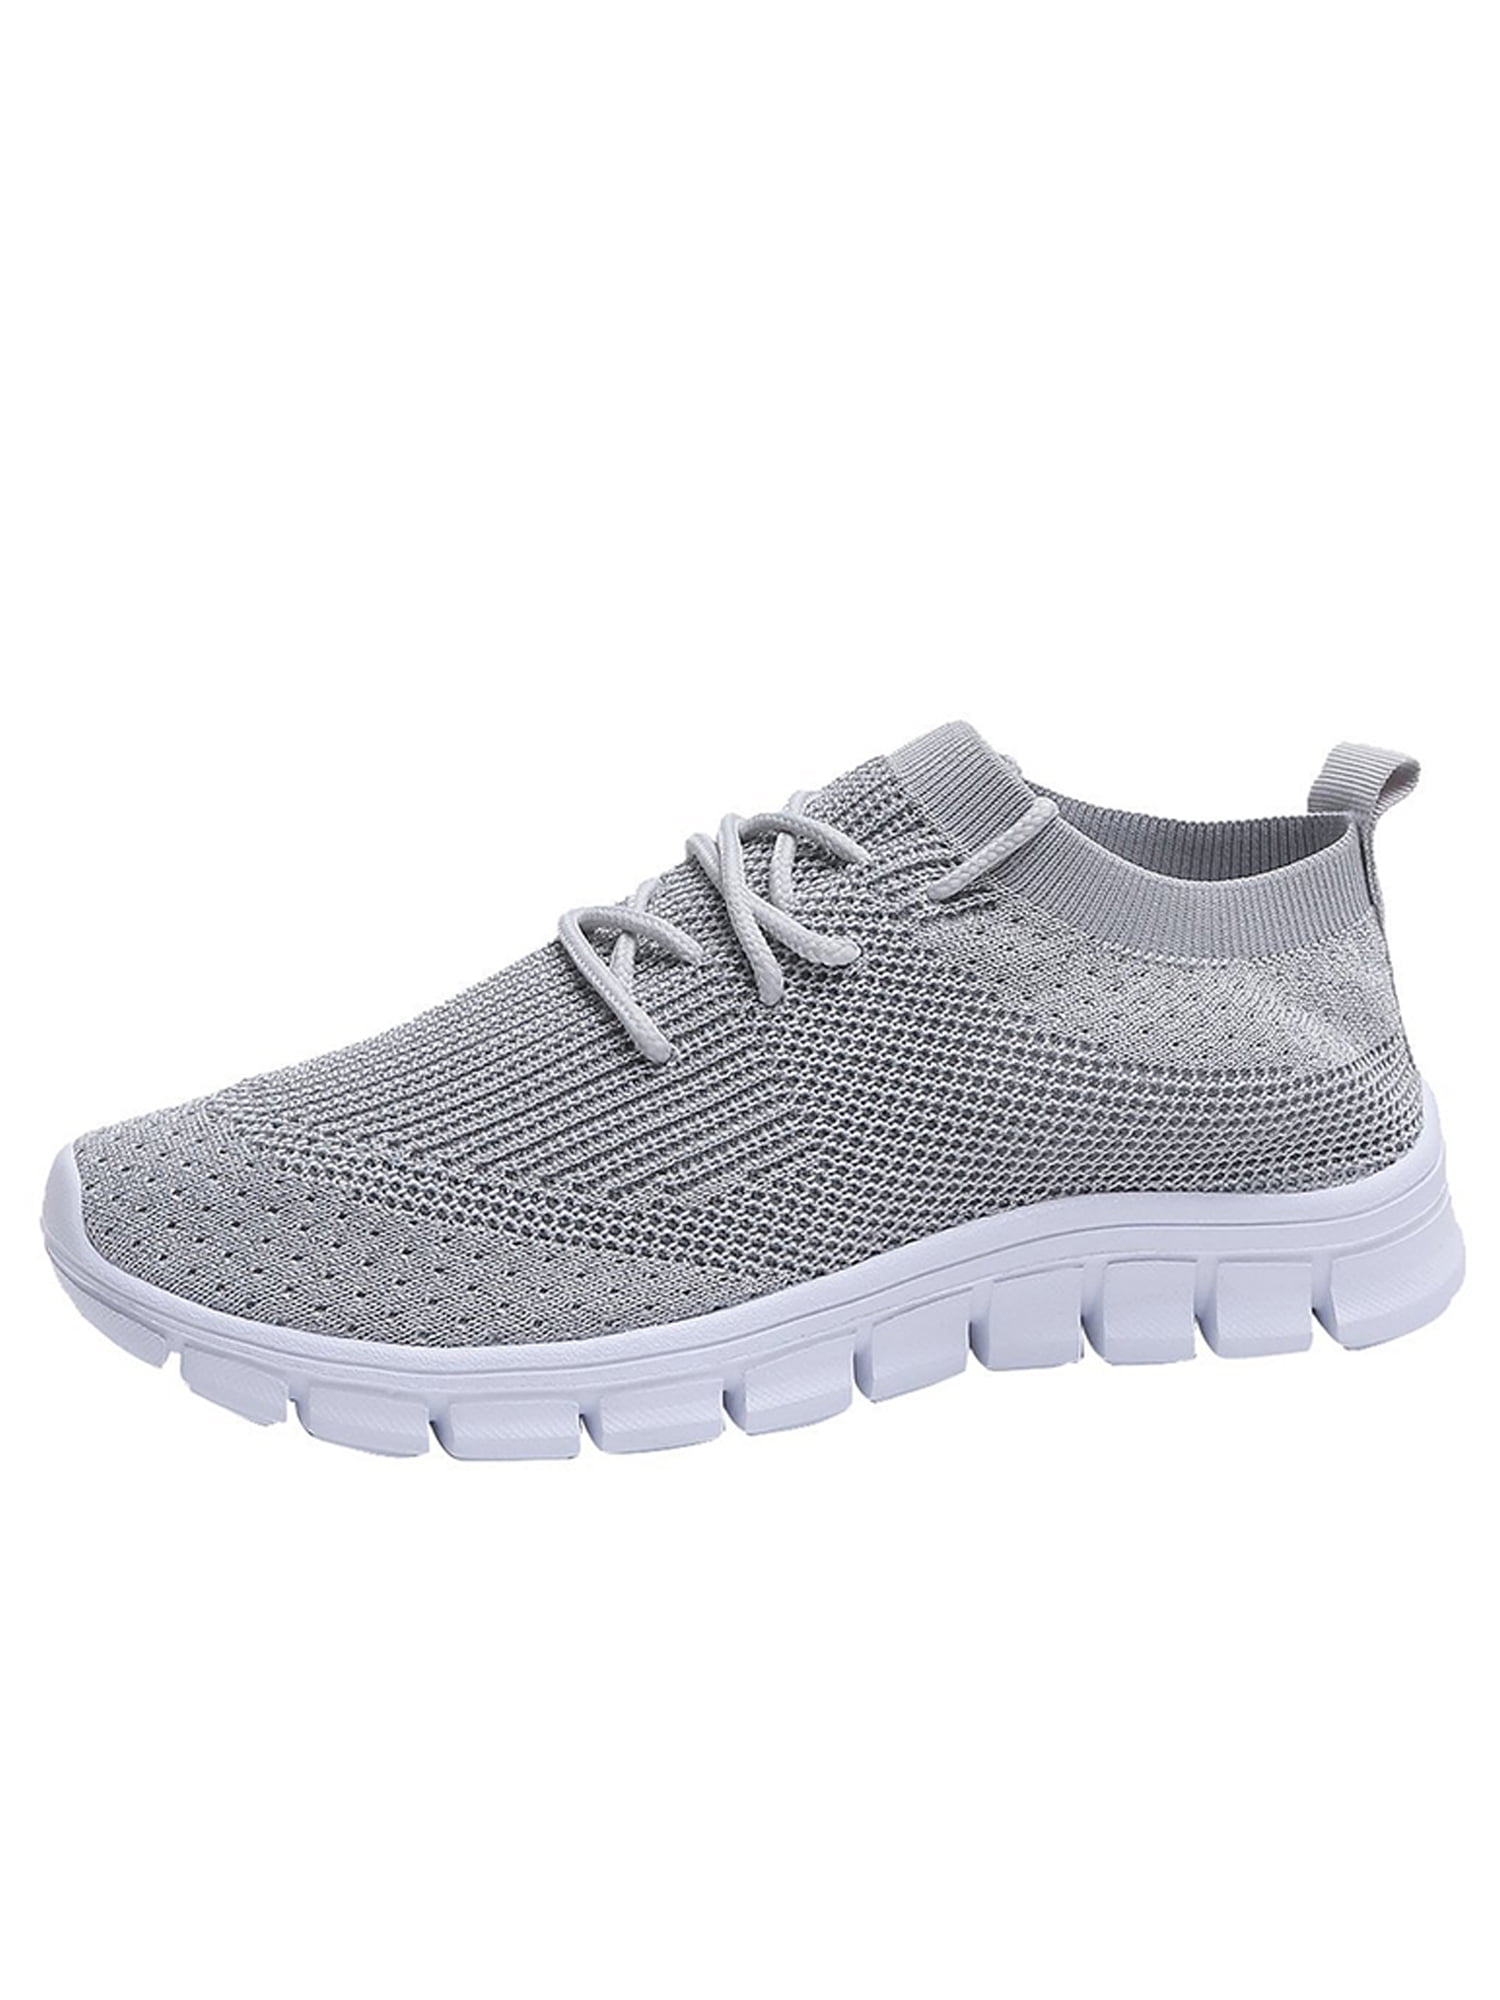 sock style trainers womens